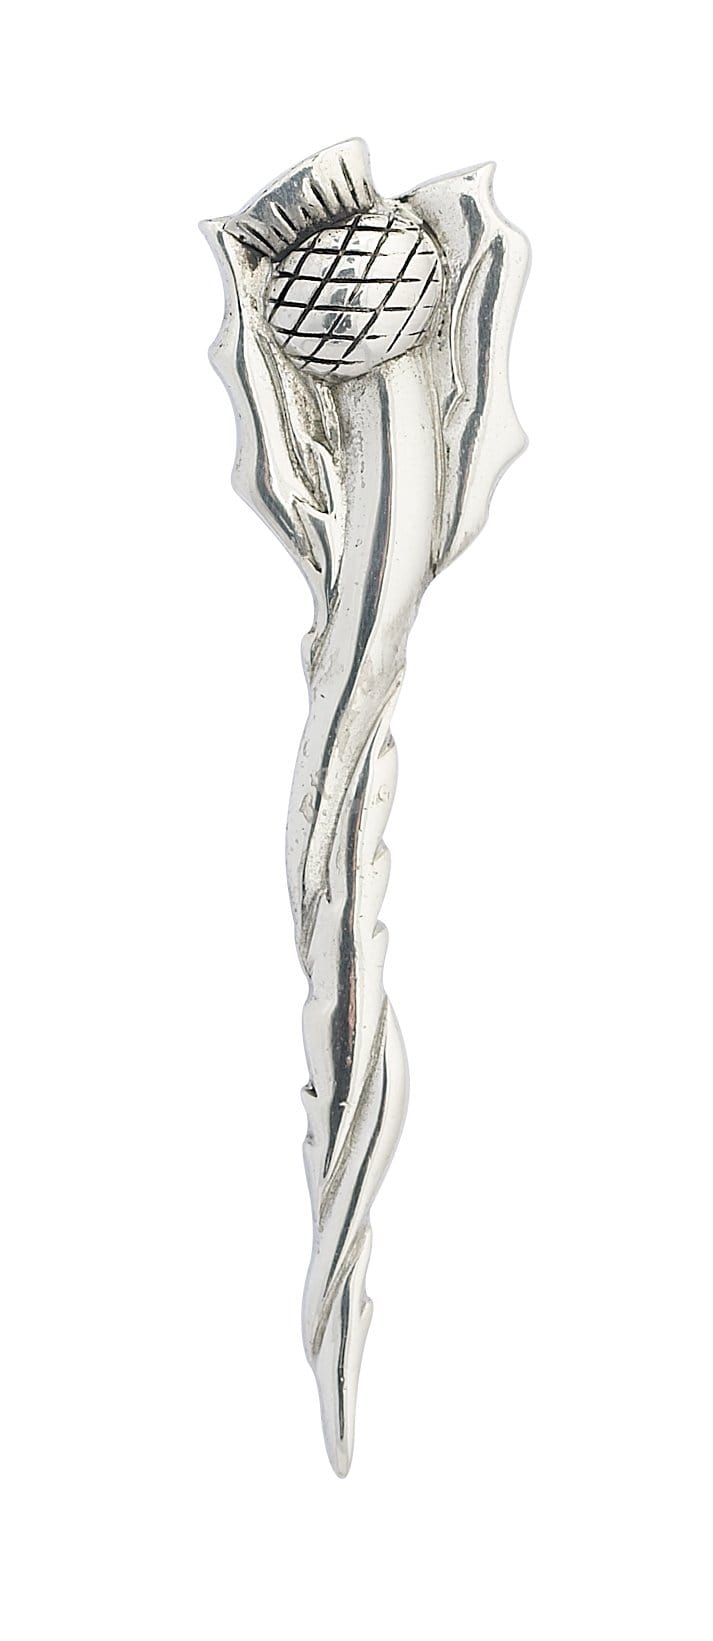 Contemporary Twisted Thistle Kilt Pin (KP34 CB) - MacGregor and MacDuff